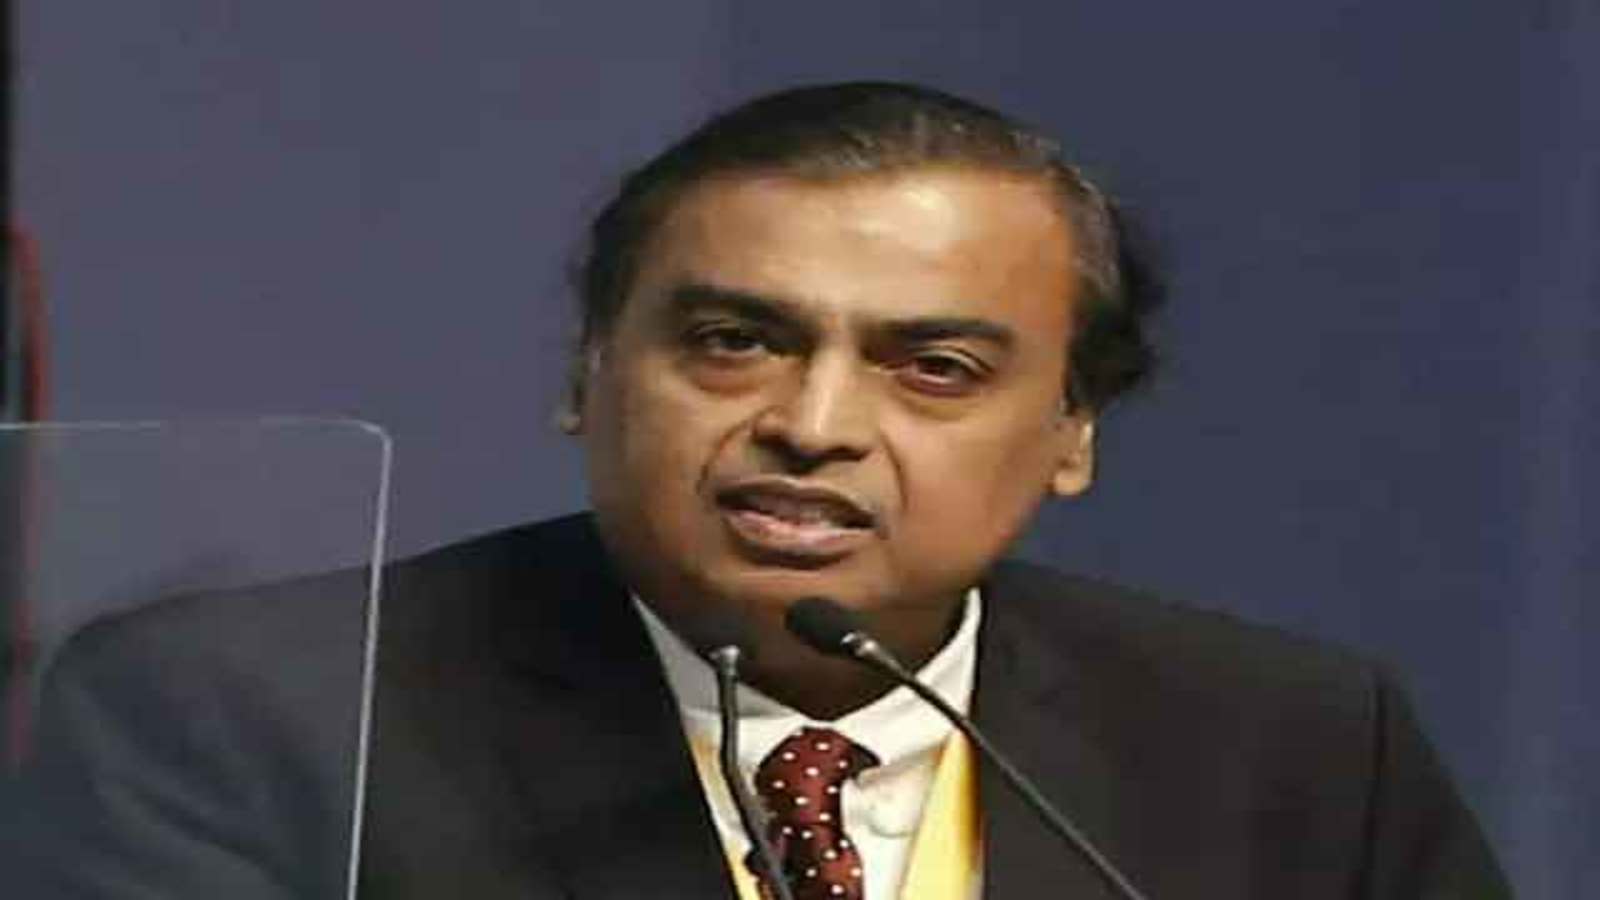 Metronome  Indian multibillionaire and Asias richest man Mukesh Ambani  has reportedly gifted a property worth INR 1500 crores equivalent to PKR  5222 crores to one of his most trusted and loyal